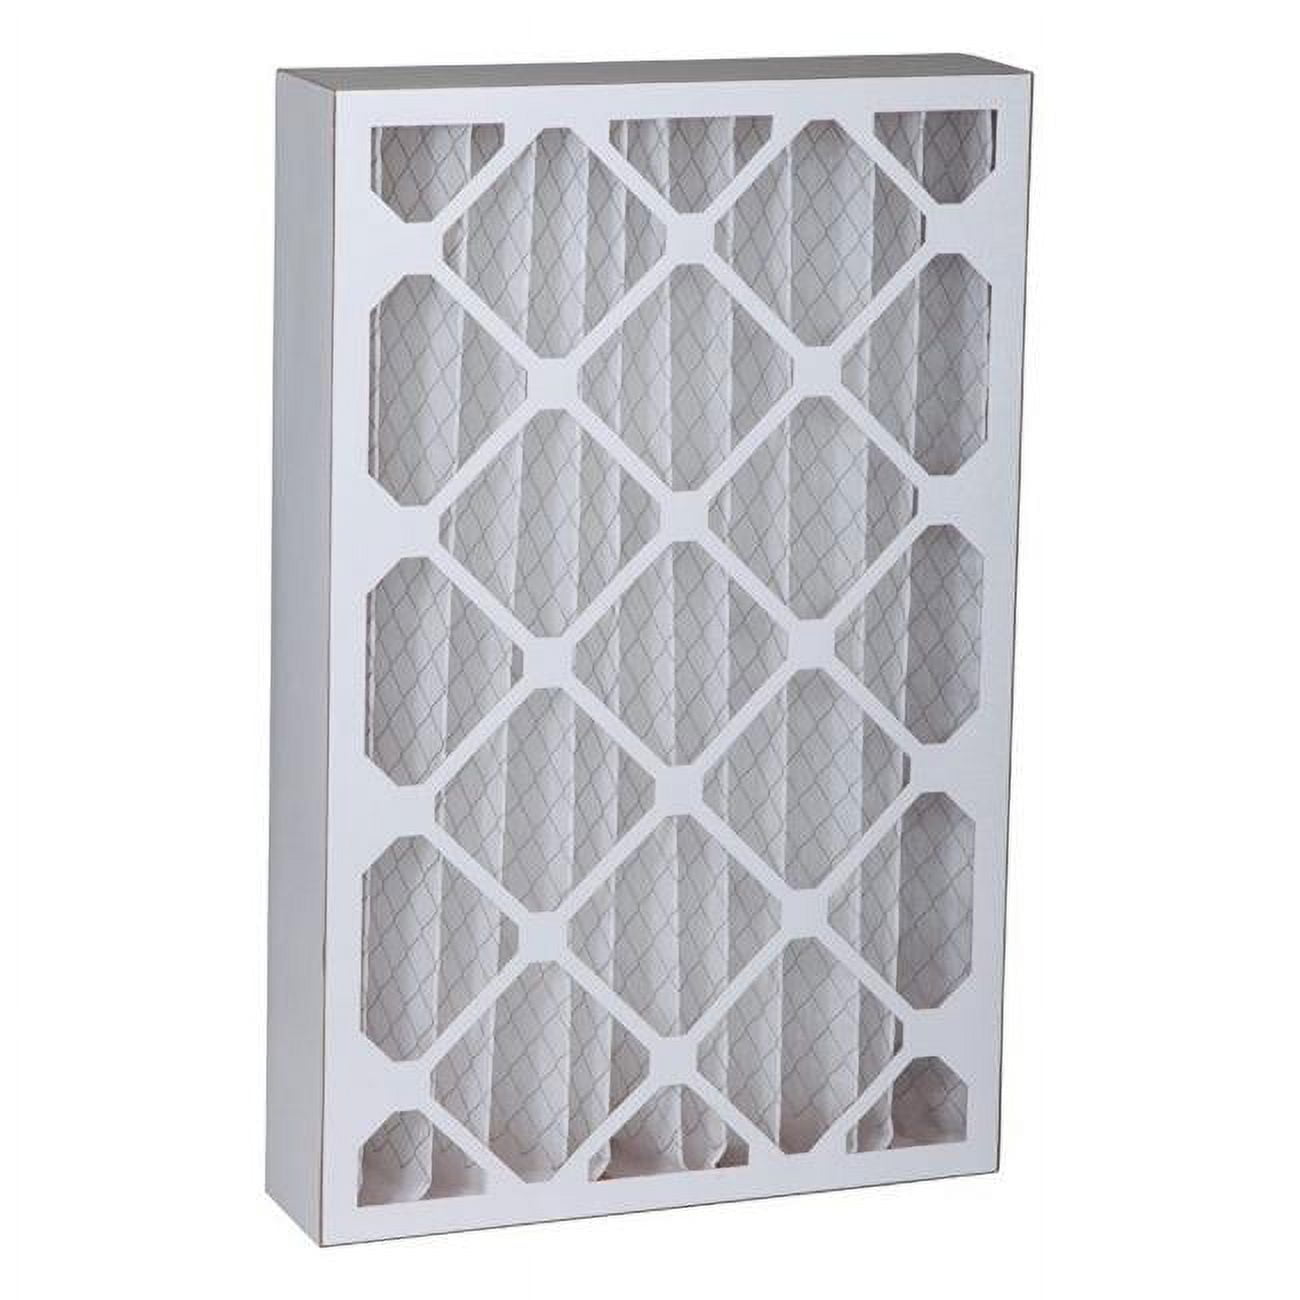 4766069 16 X 25 X 4 In. Pleated Air Filter- Pack Of 3